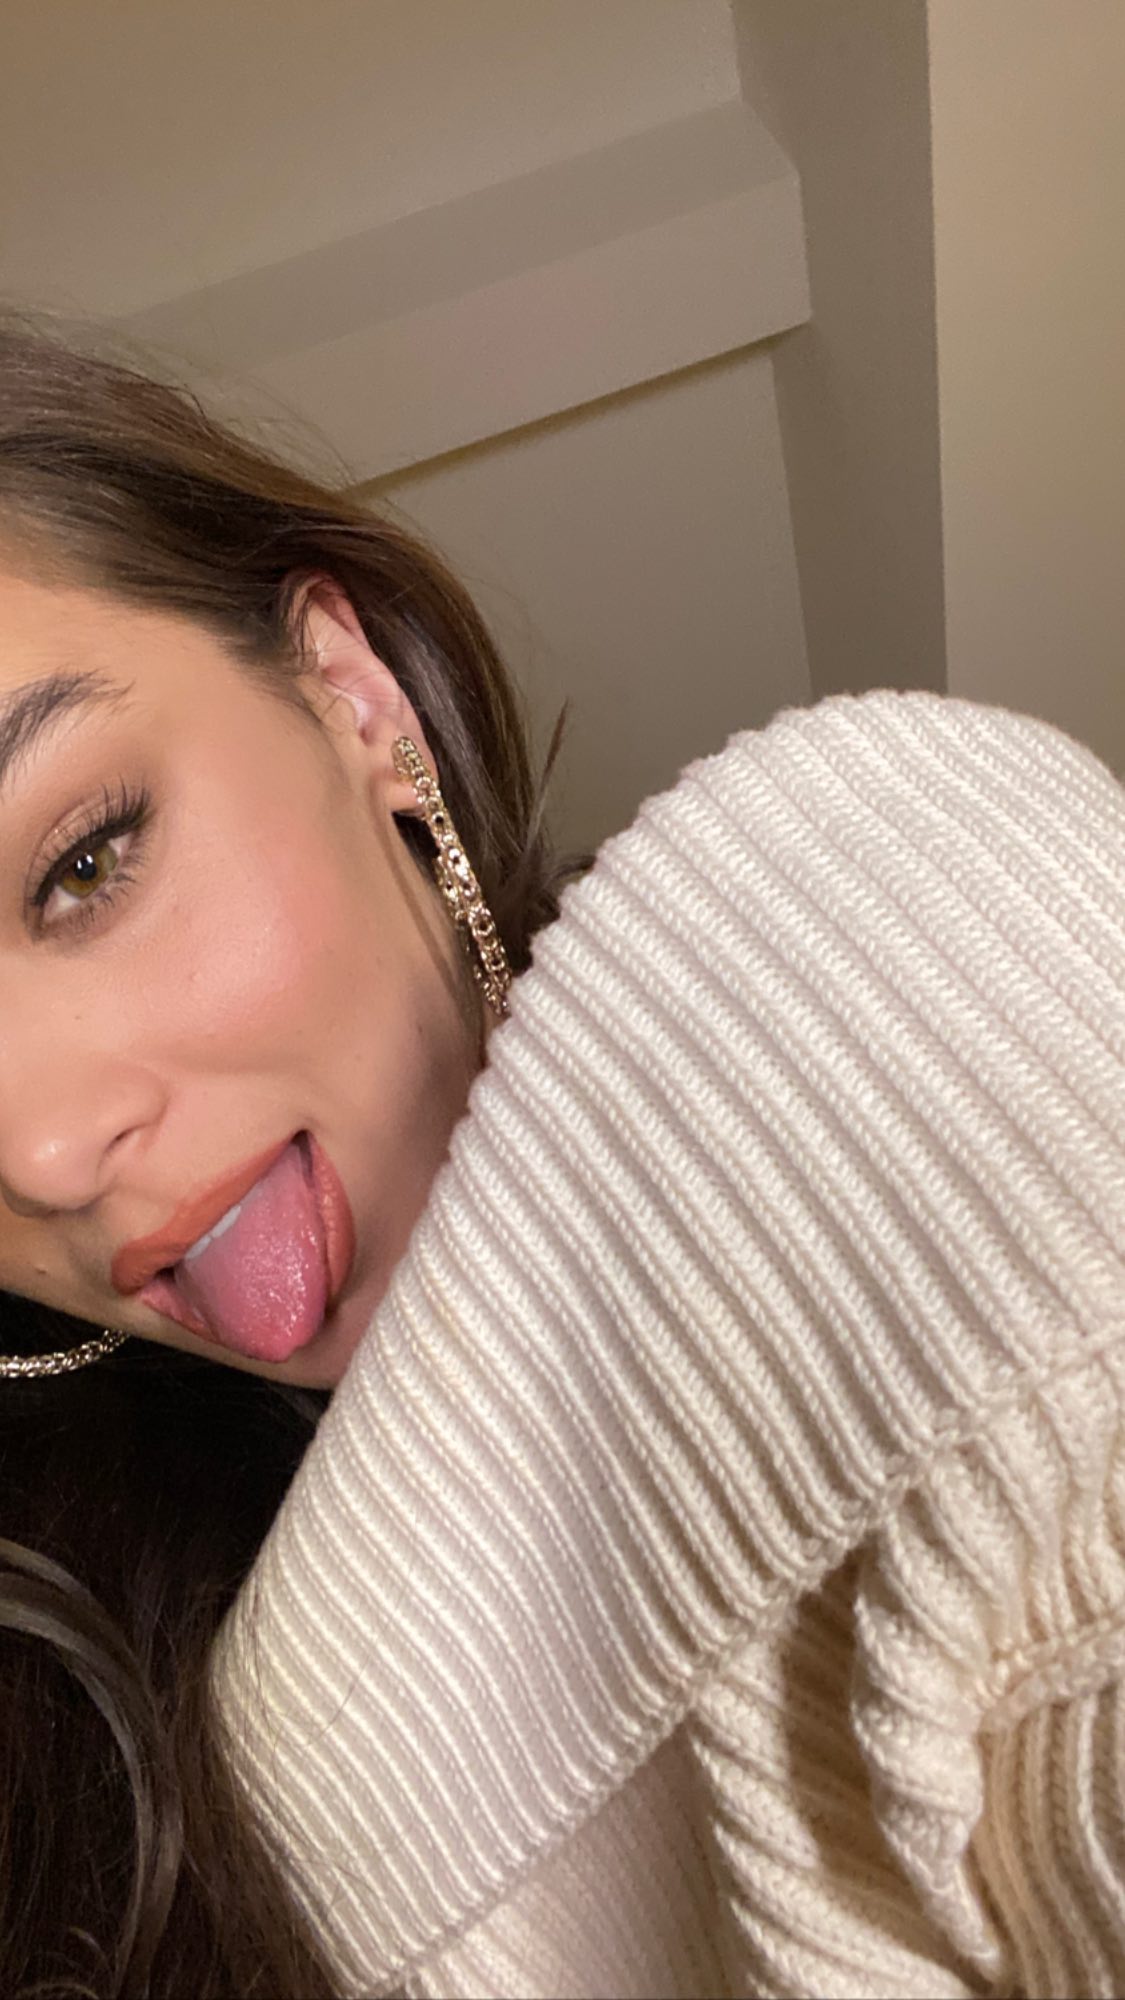 Photos n°5 : Hailee Steinfeld Does Press From Home!